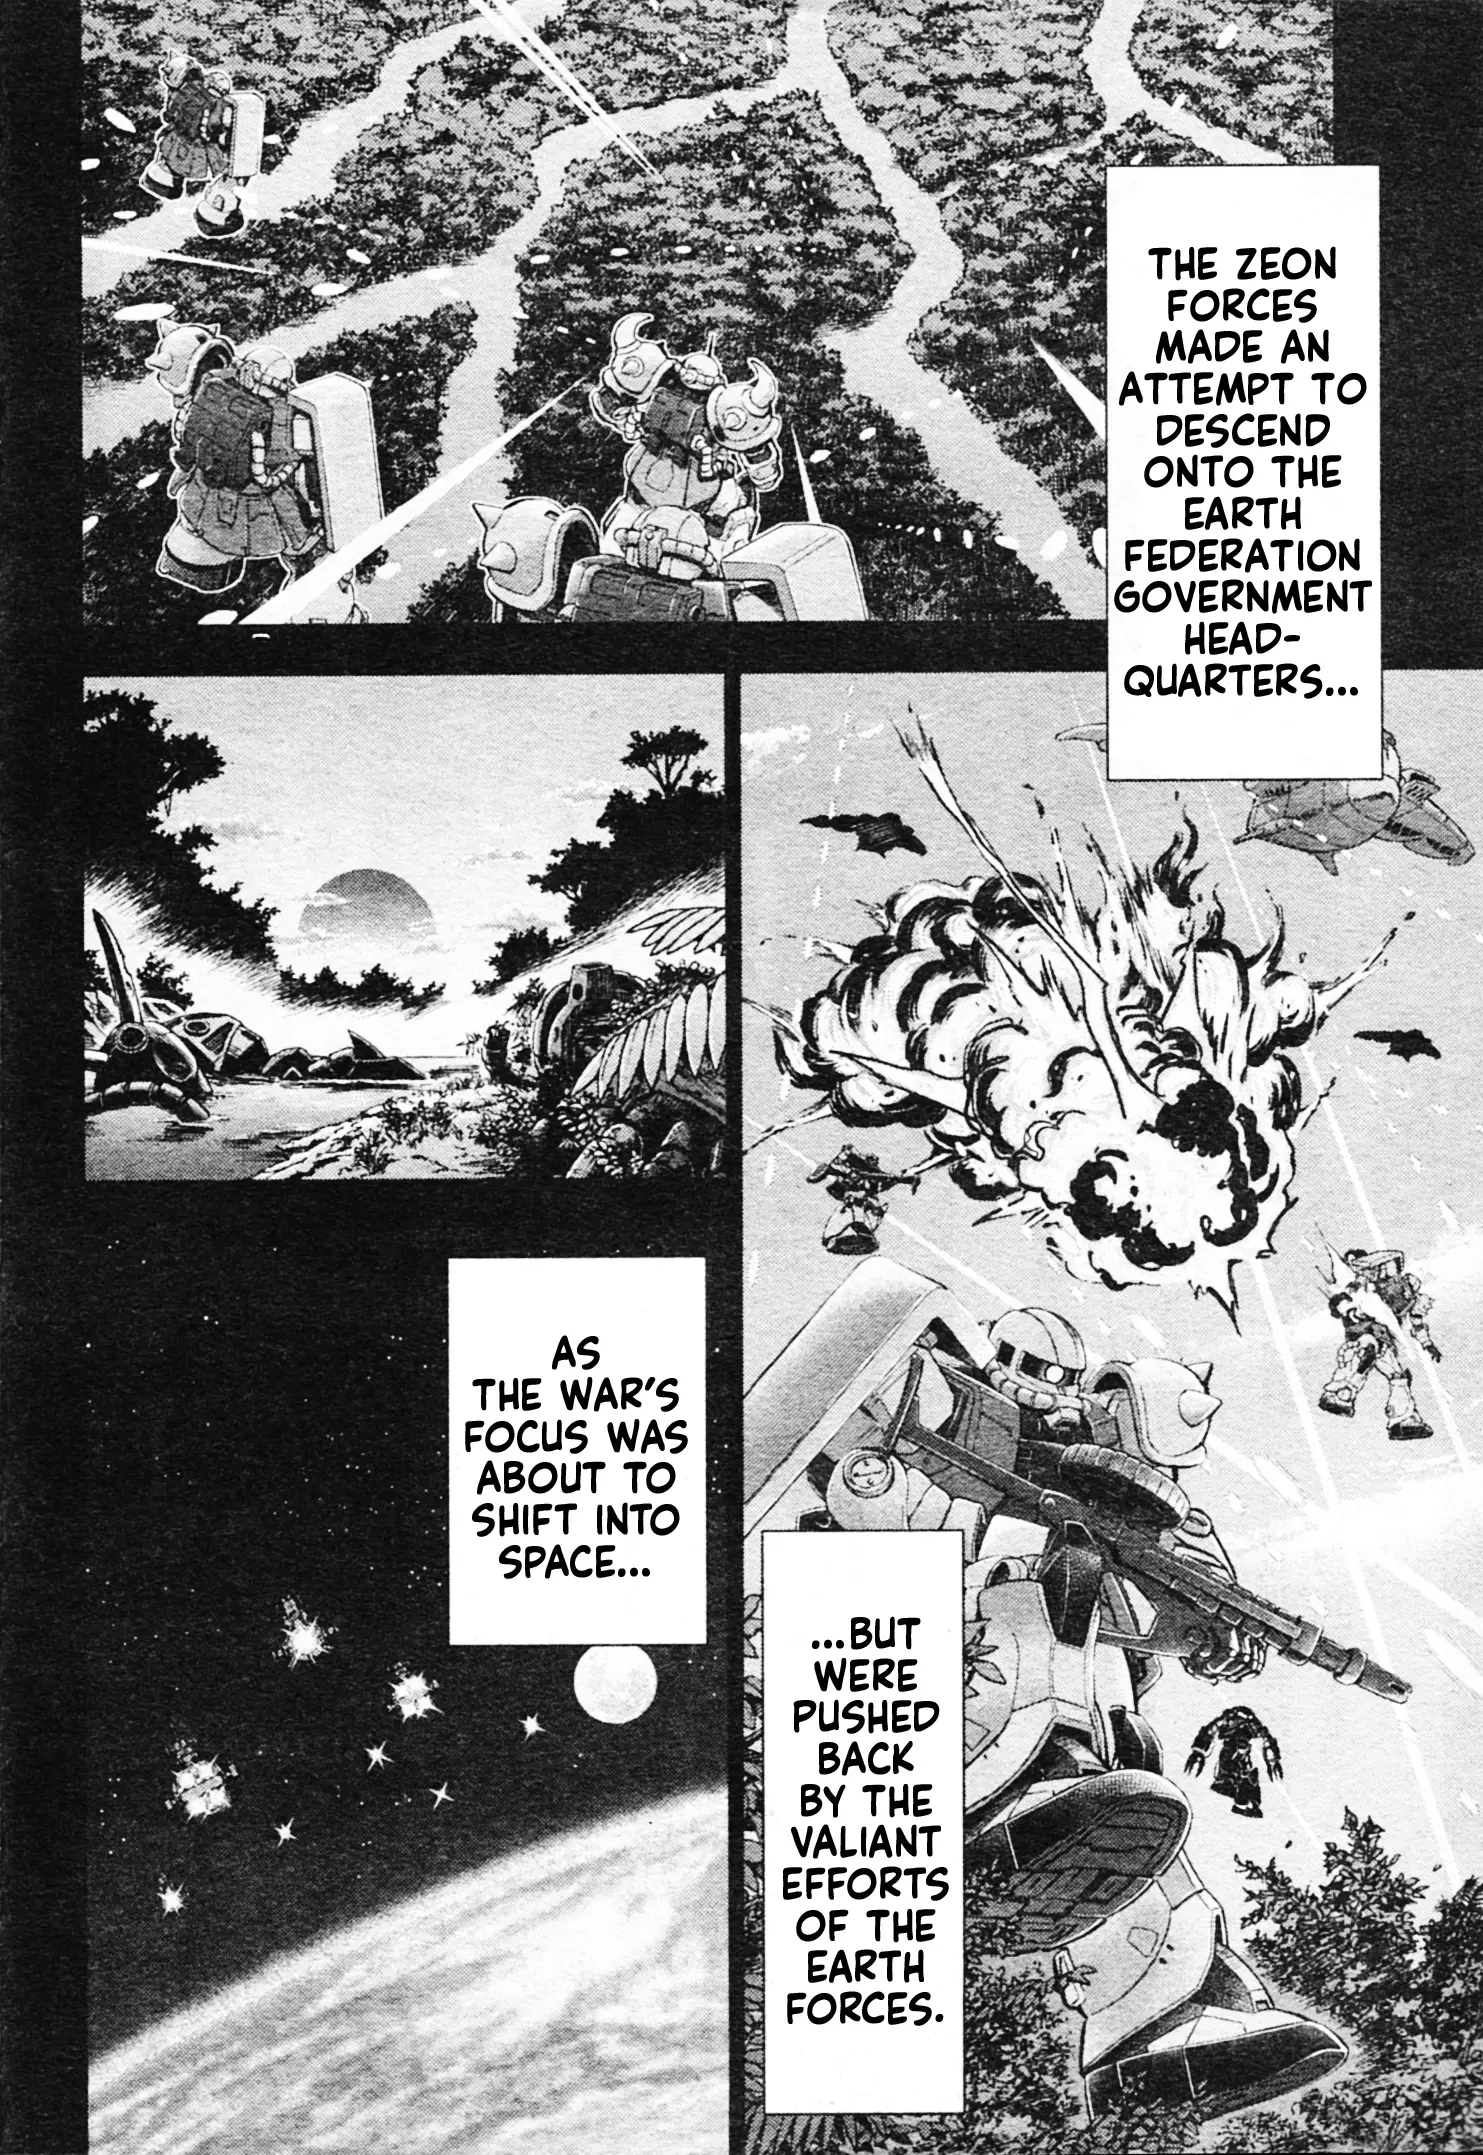 Mobile Suit Gundam: Red Giant 03Rd Ms Team - 1 page 2-cbbcc477